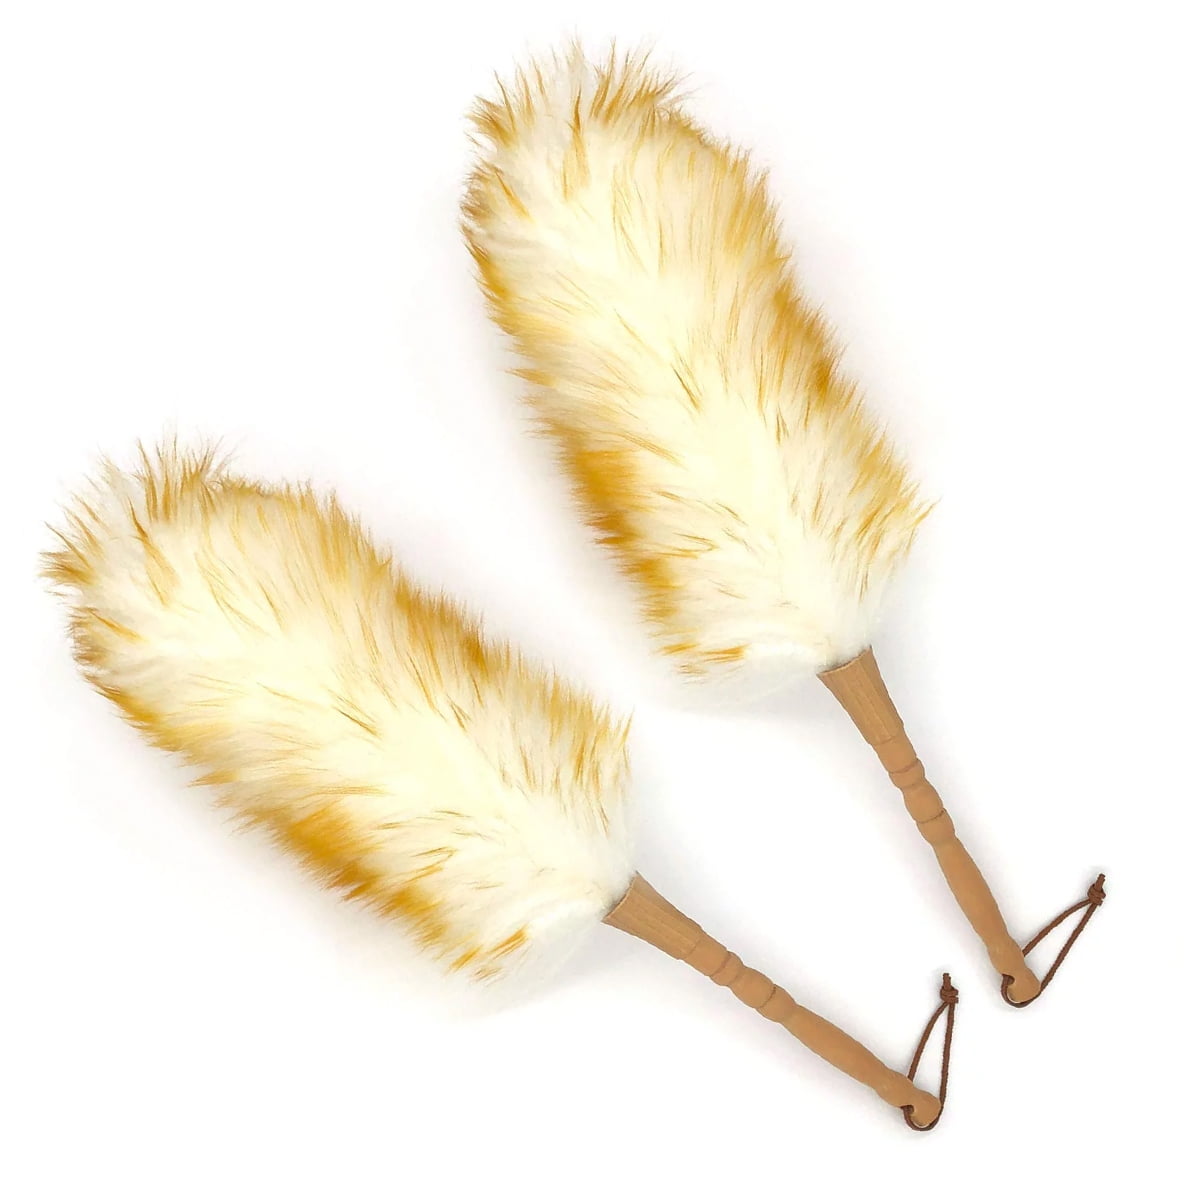 Wool Dusters - 1 Section Extension Lambswool Duster